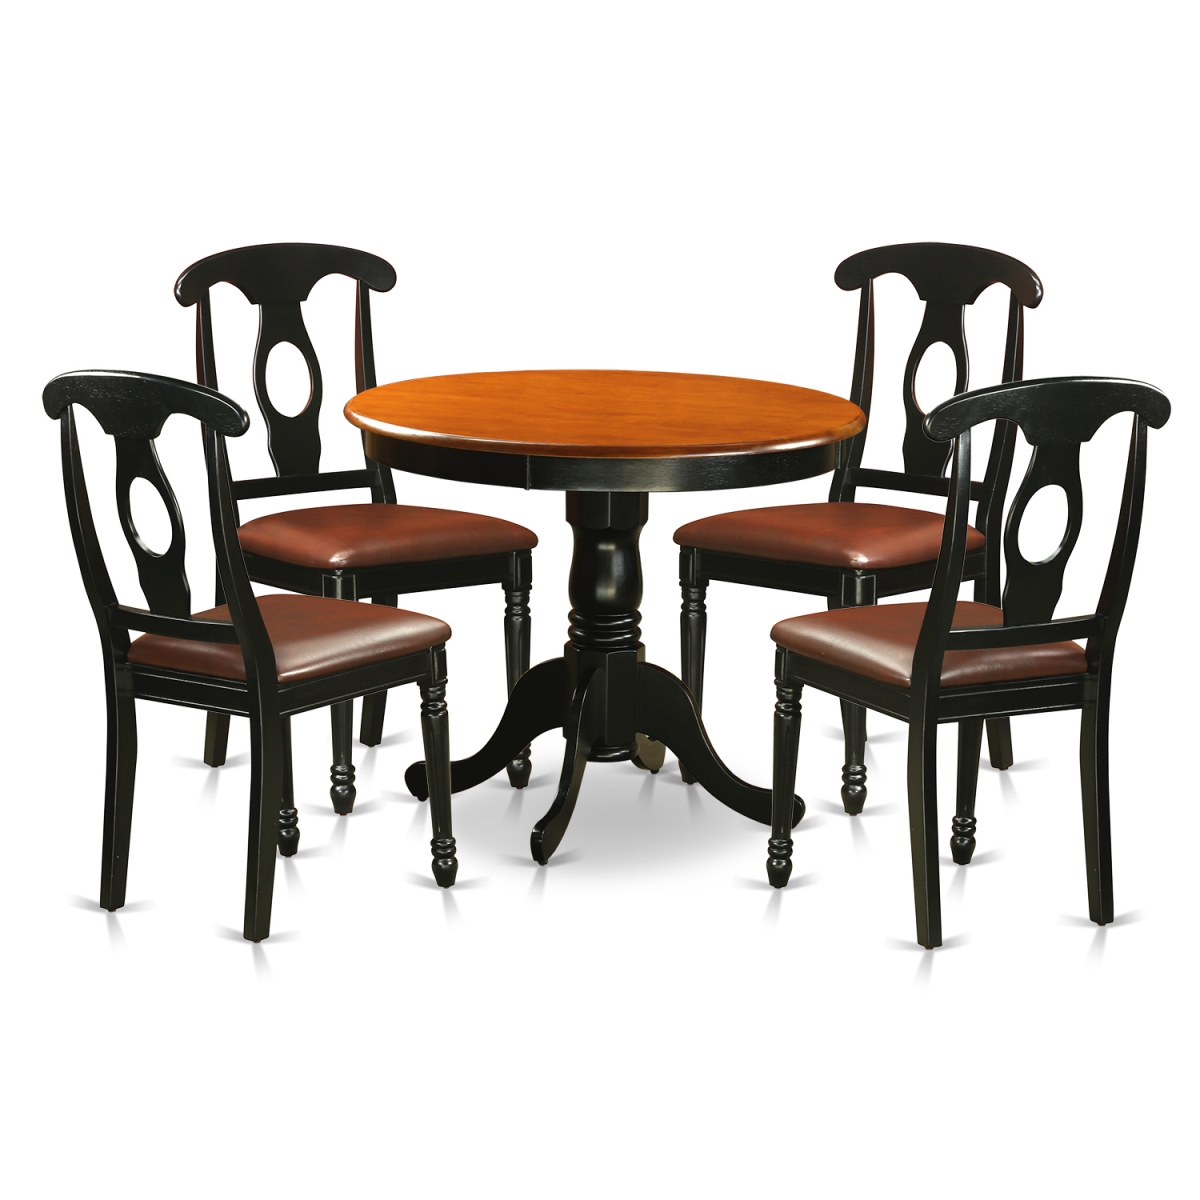 Picture of East West Furniture ANKE5-BLK-LC Dining Set Including 4 Faux Leather Chairs, Black & Cherry - 5 Piece